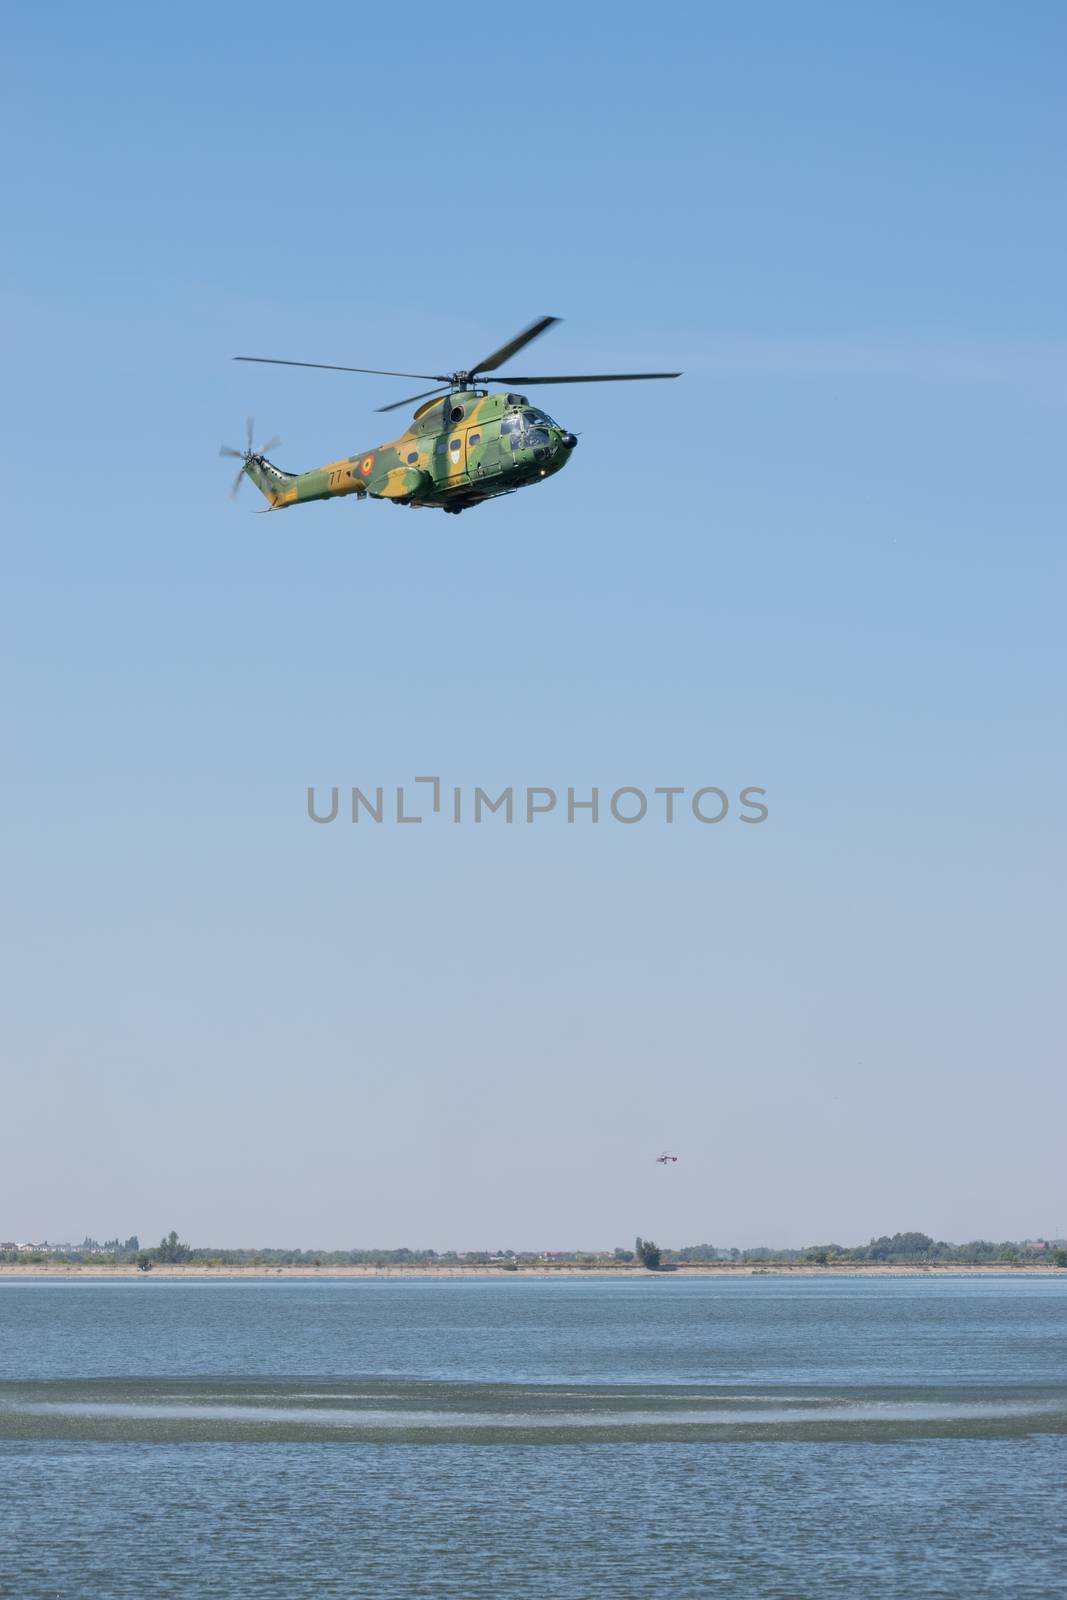 Bucharest/ Romania - AeroNautic Show - September 21, 2019: Puma IAR330 Helicopter flying above the lake by Luca-Mih